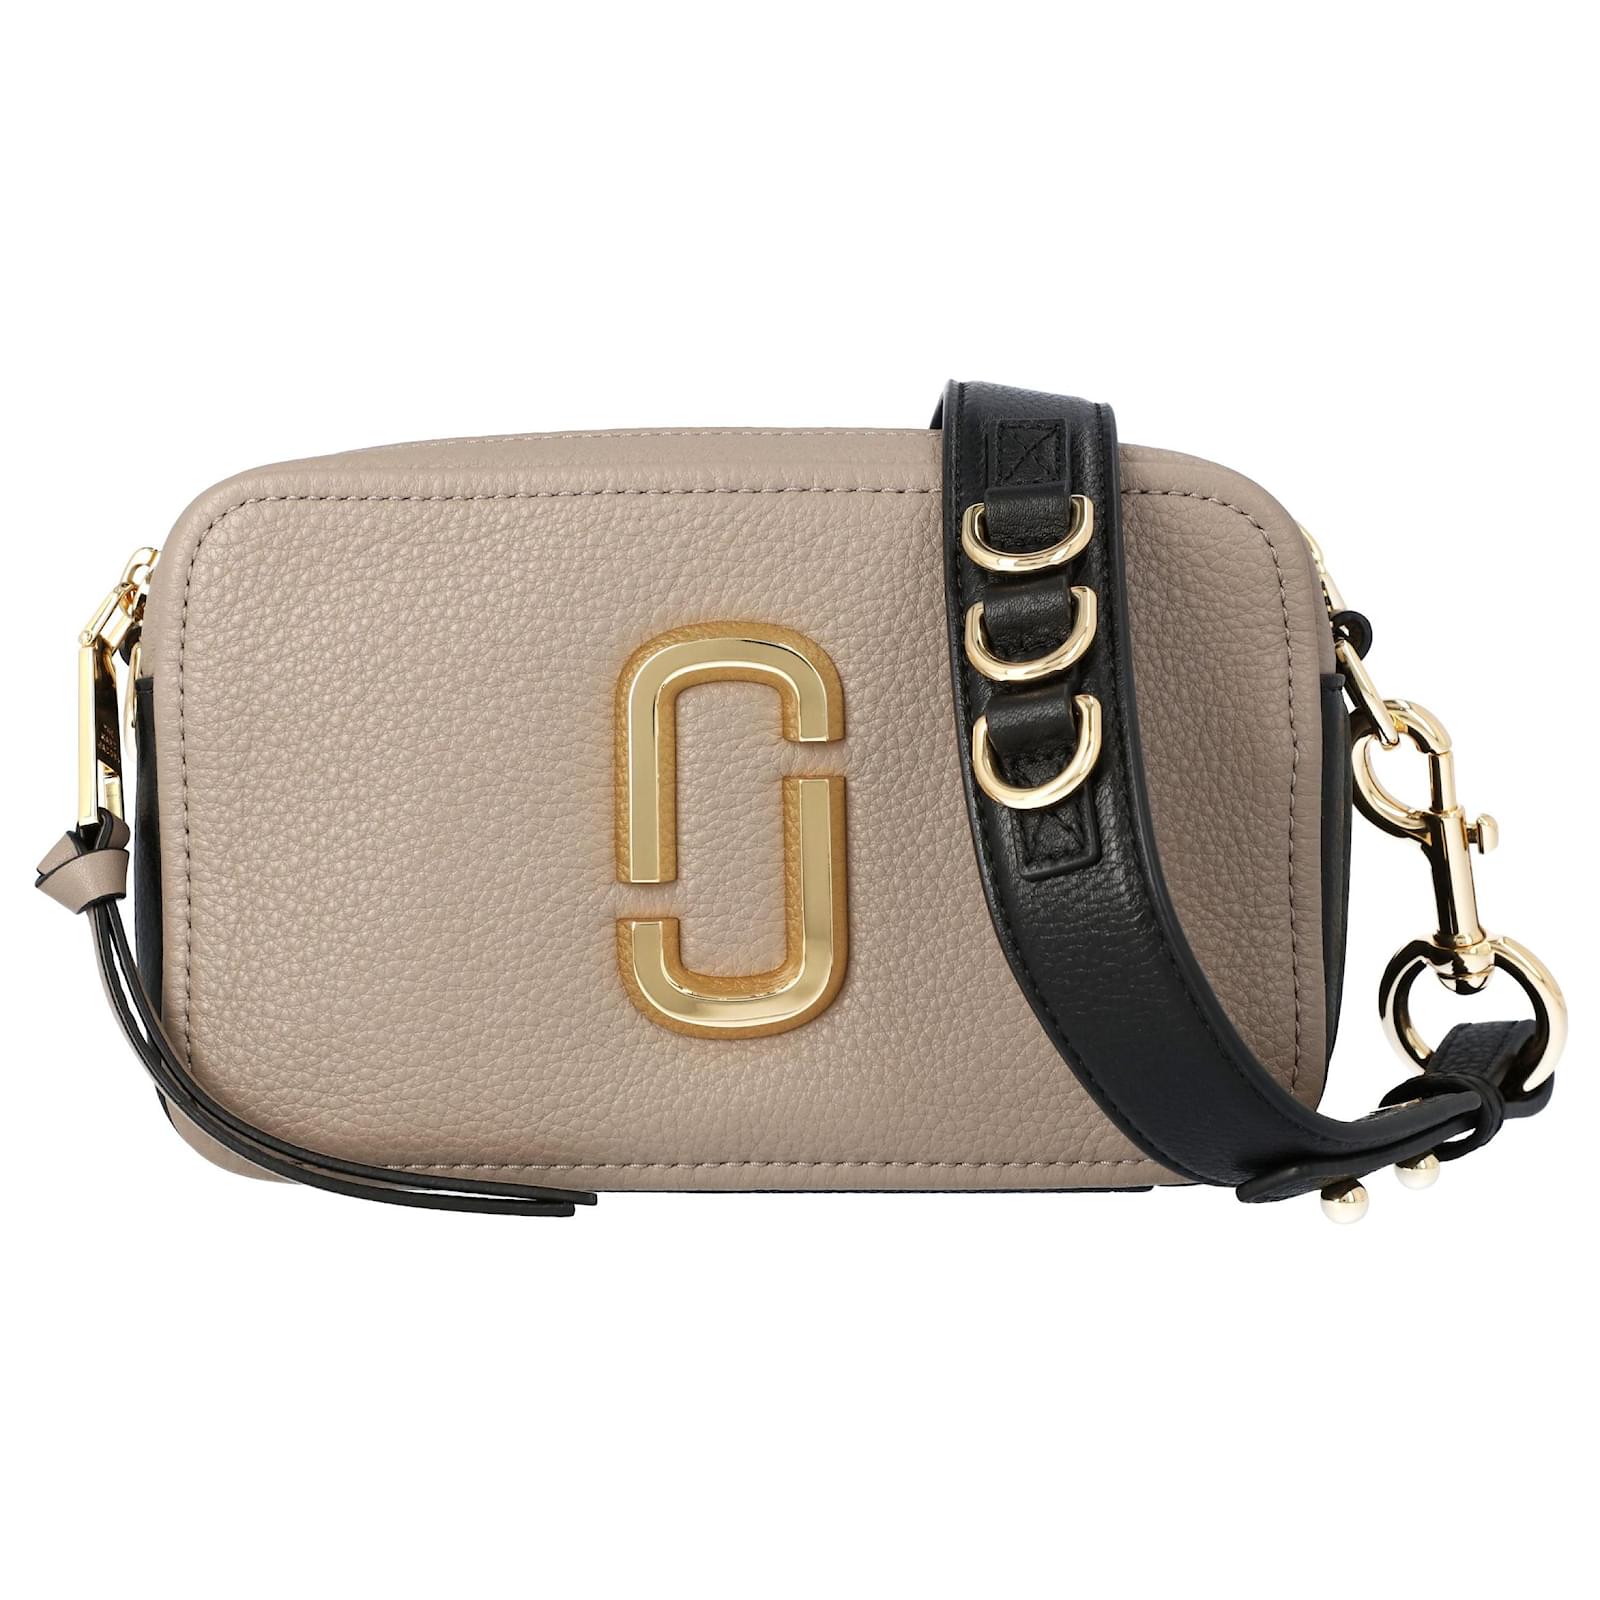 Marc Jacobs Snapshot Leather Cross-body Bag in Gray